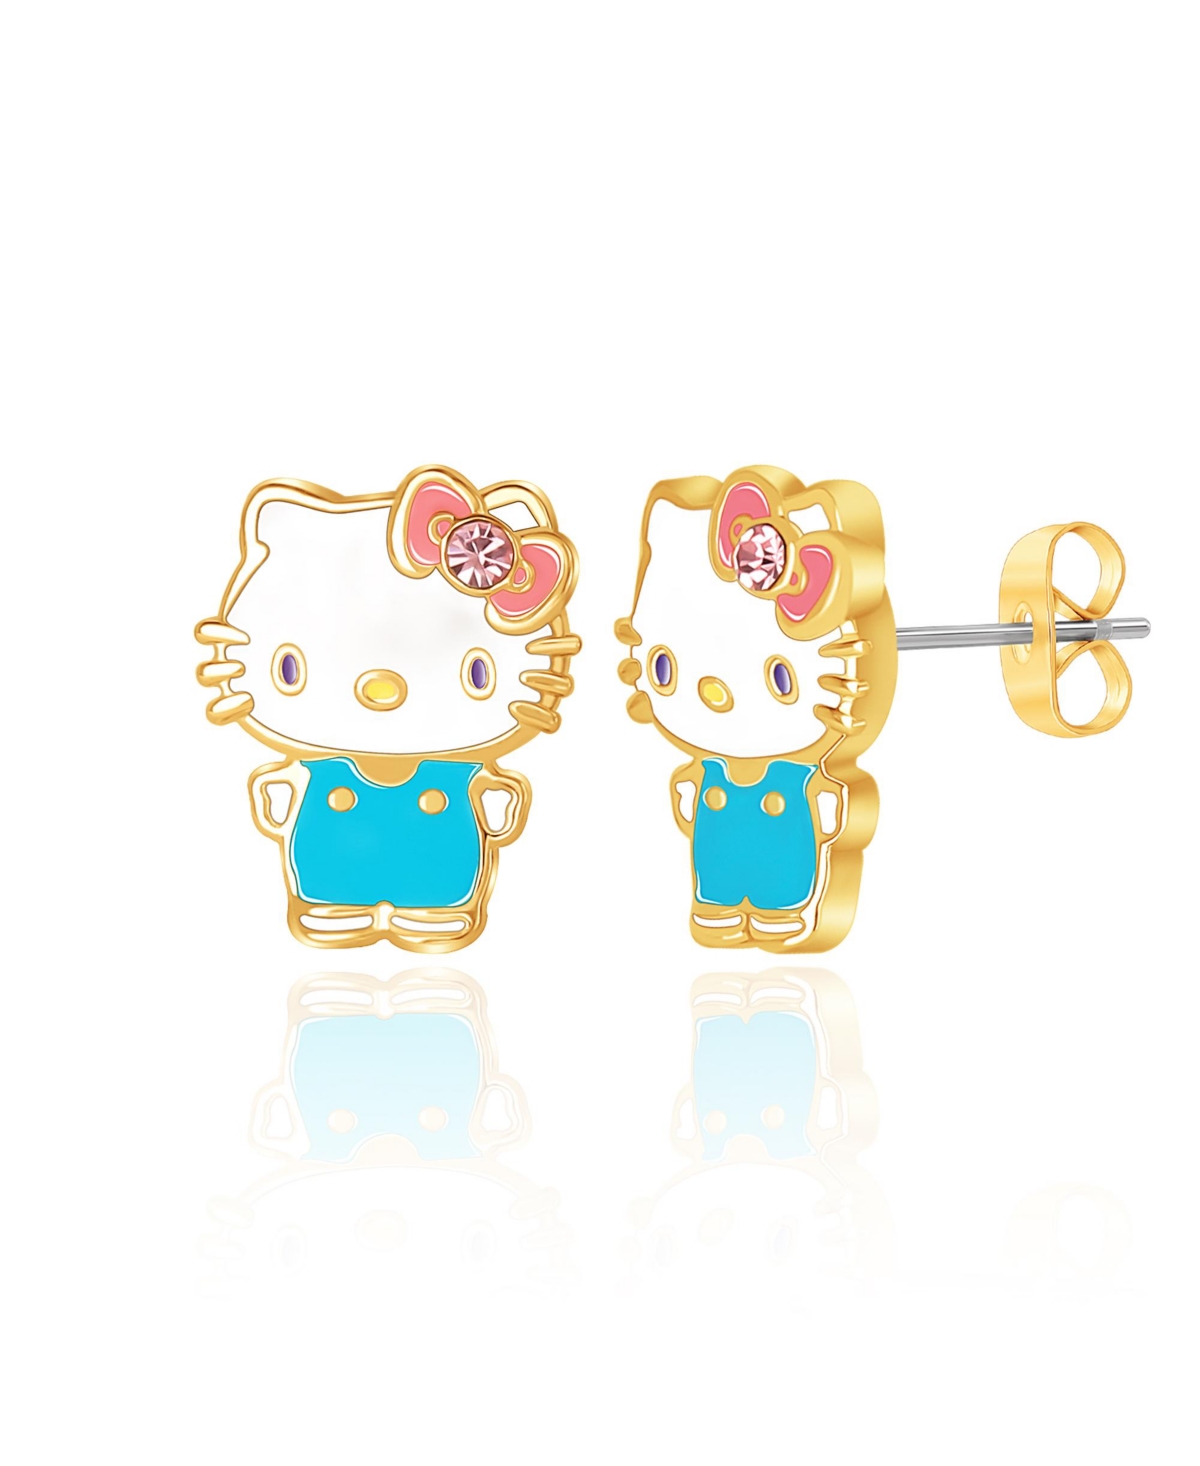 Sanrio Hello Kitty Brass Flash Plated Enamel and Pink Crystals Stud Earrings - White, blue